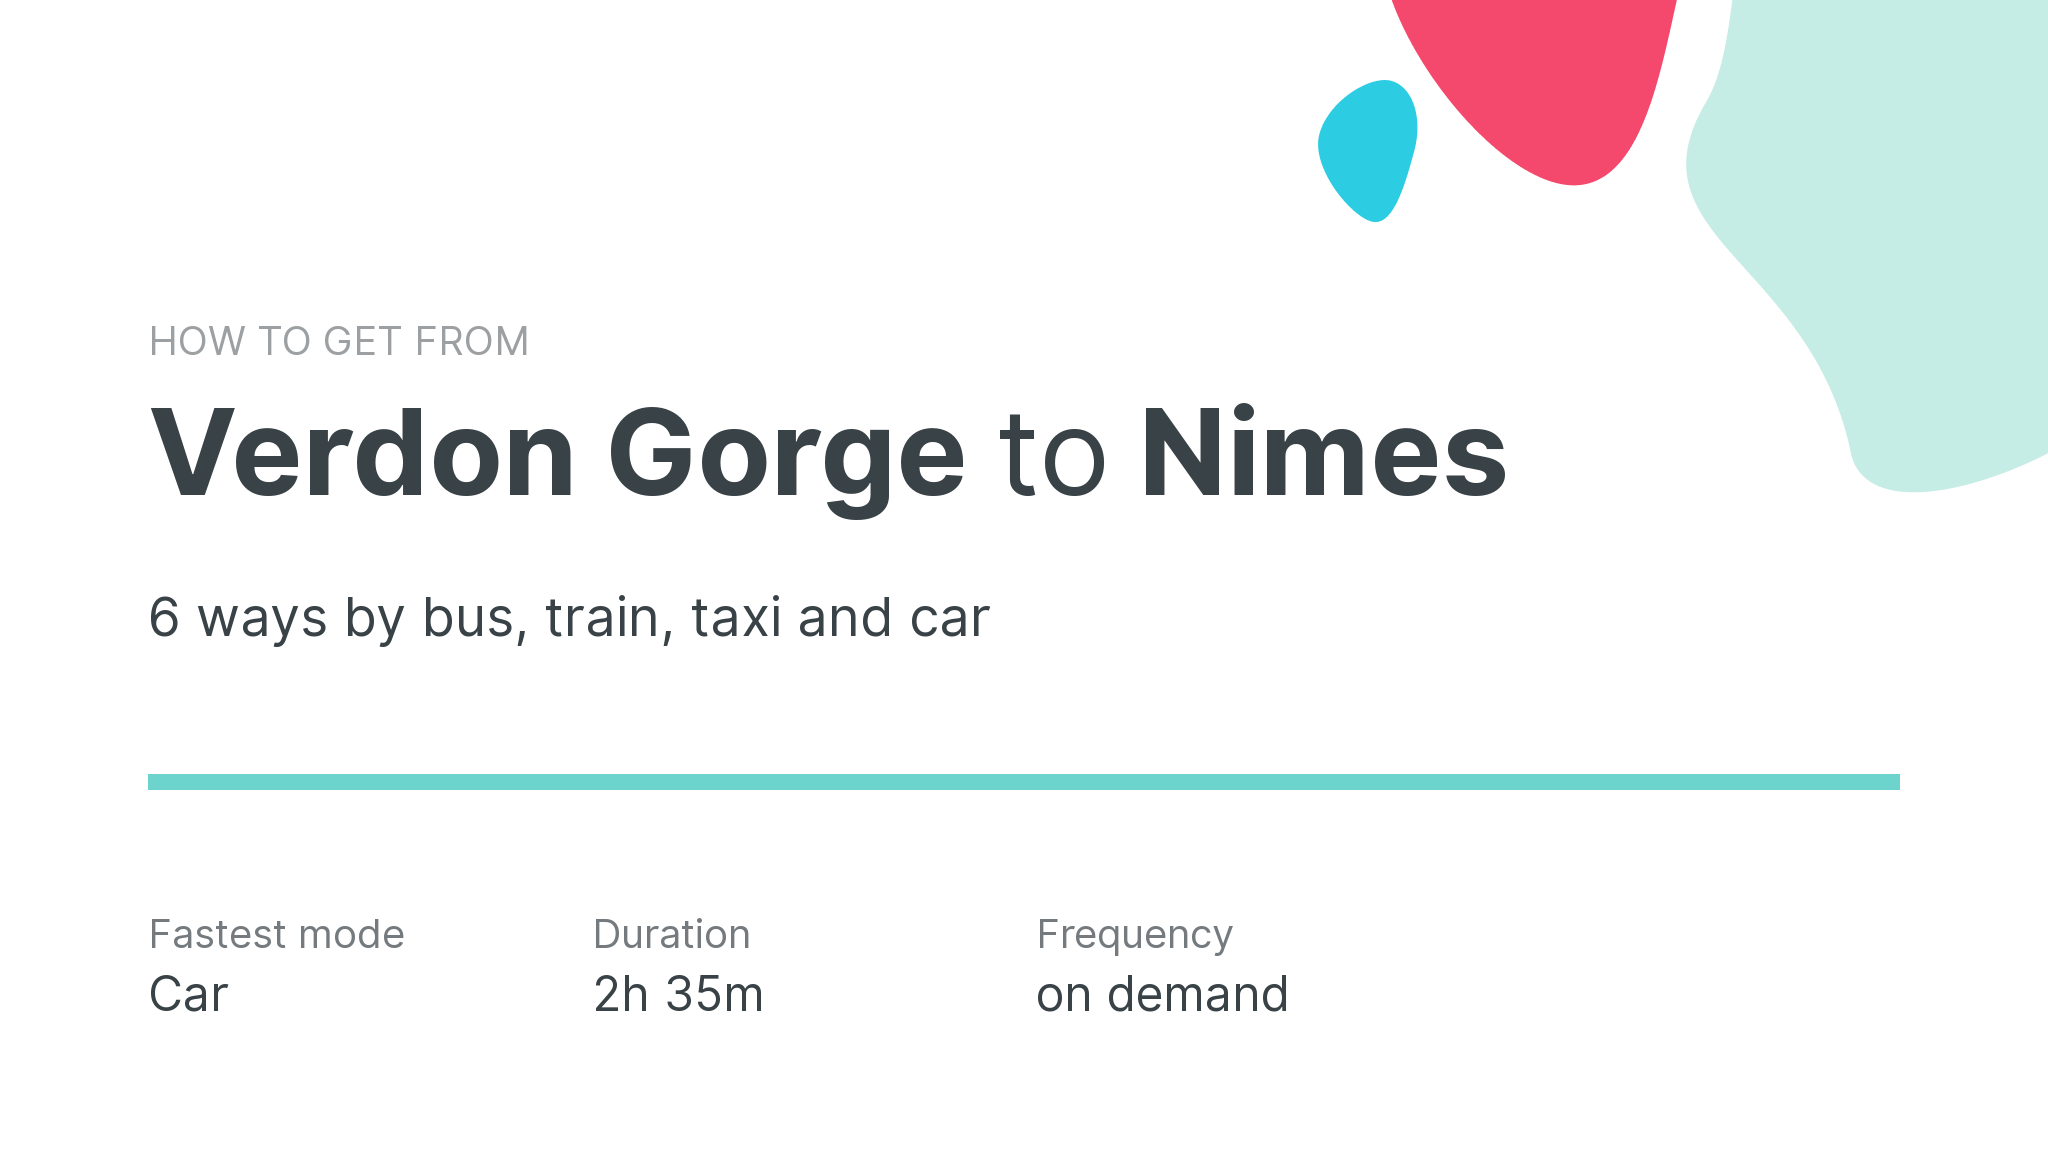 How do I get from Verdon Gorge to Nimes